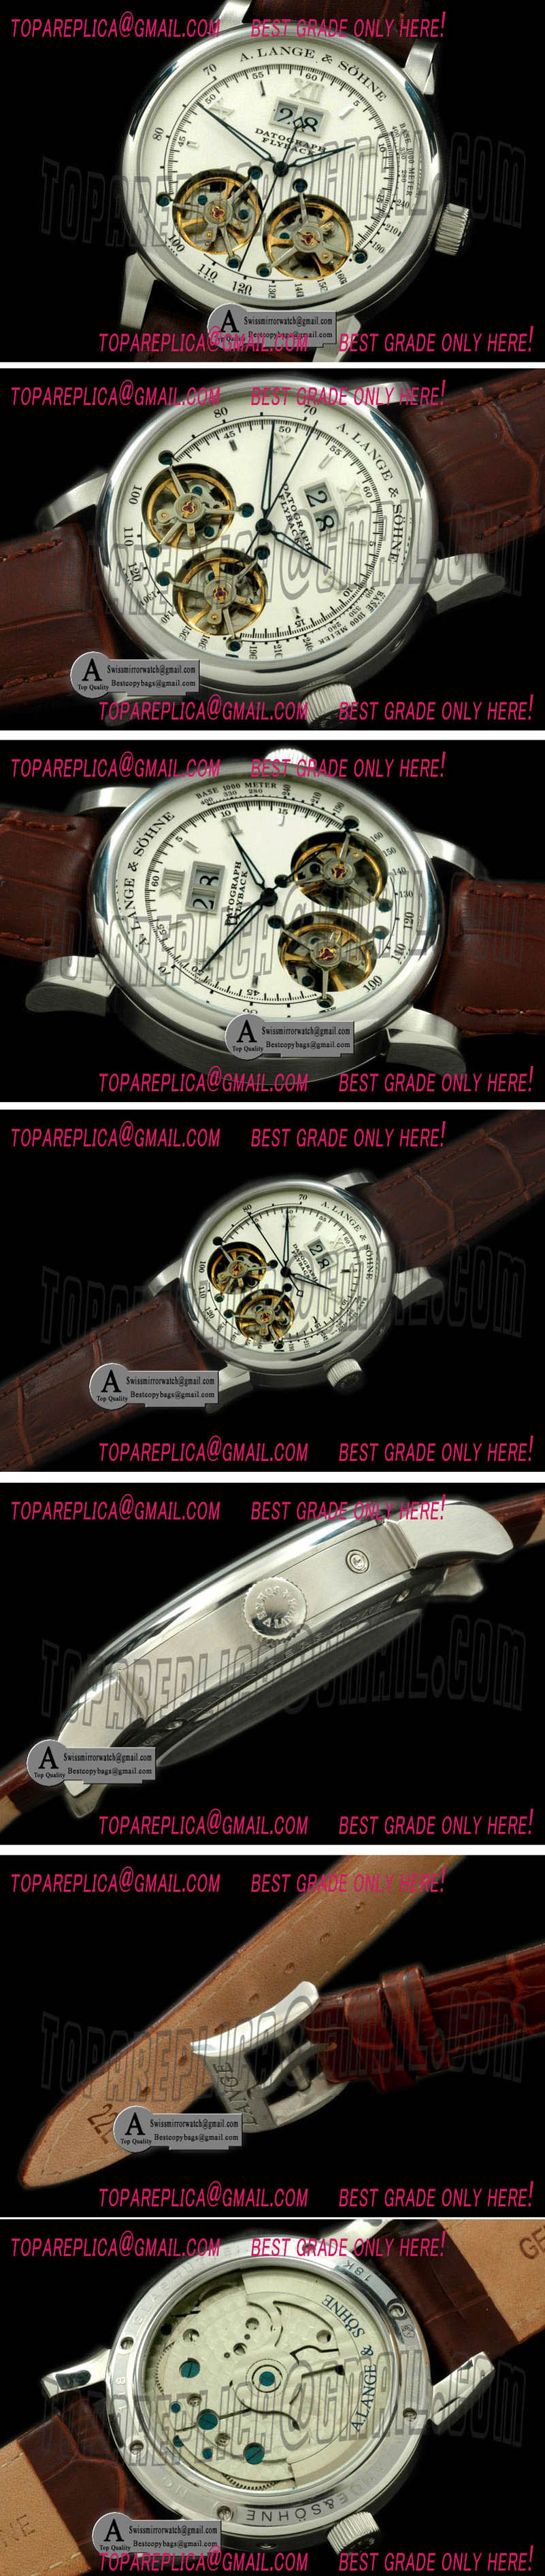 A.Lange & Sohne Duo Tourbillon Big Date SS Leather White Asian 2813 Replica Watches